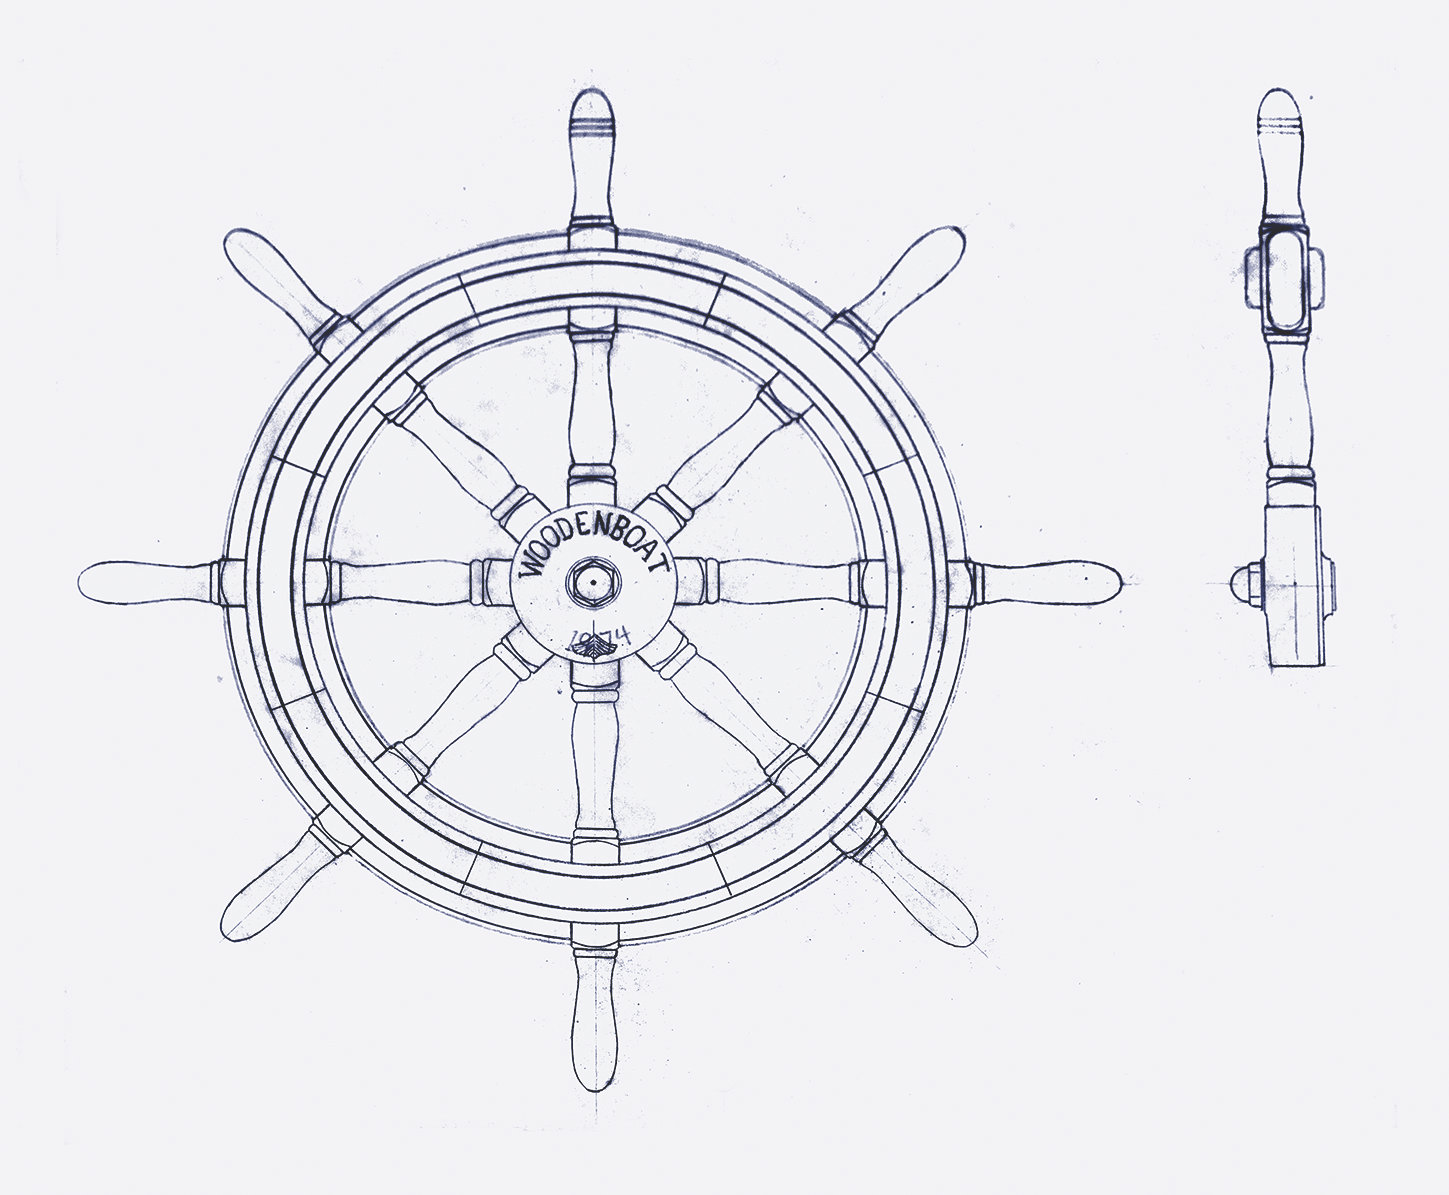 Building a Classically Inspired Ship's Wheel – Mastering Skills